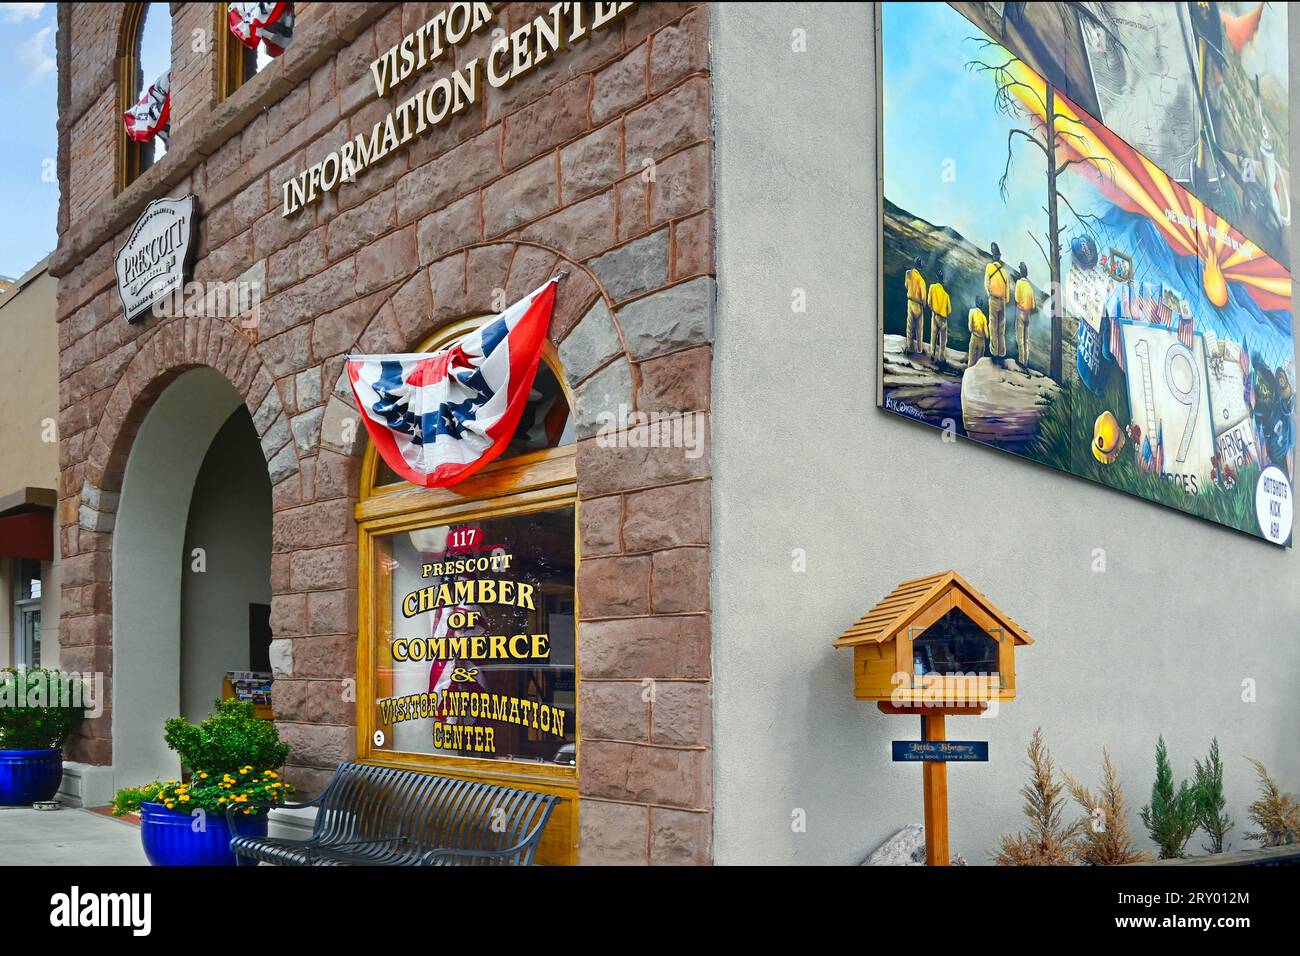 The Prescott Arizona Chamber of Commerce and Visitor Information Center building with murals and signage in downtown Prescott, AZ Stock Photo